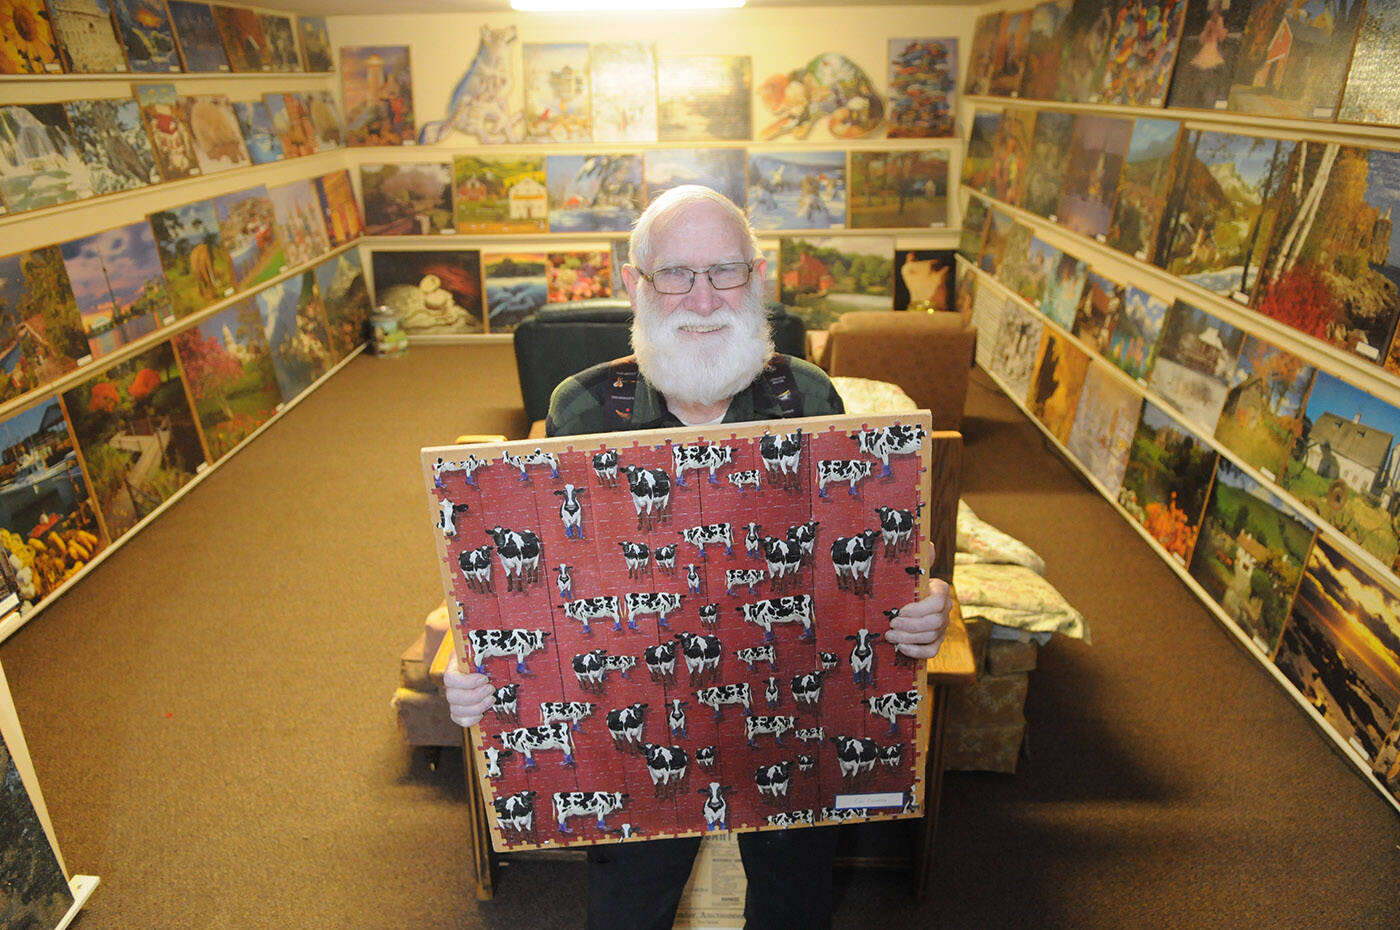 Joe Sommer has completed 190 jigsaw puzzles, all of which are on display in the basement of his Chilliwack home. Seen here are about half of the puzzles. (Jenna Hauck/ Chilliwack Progress)